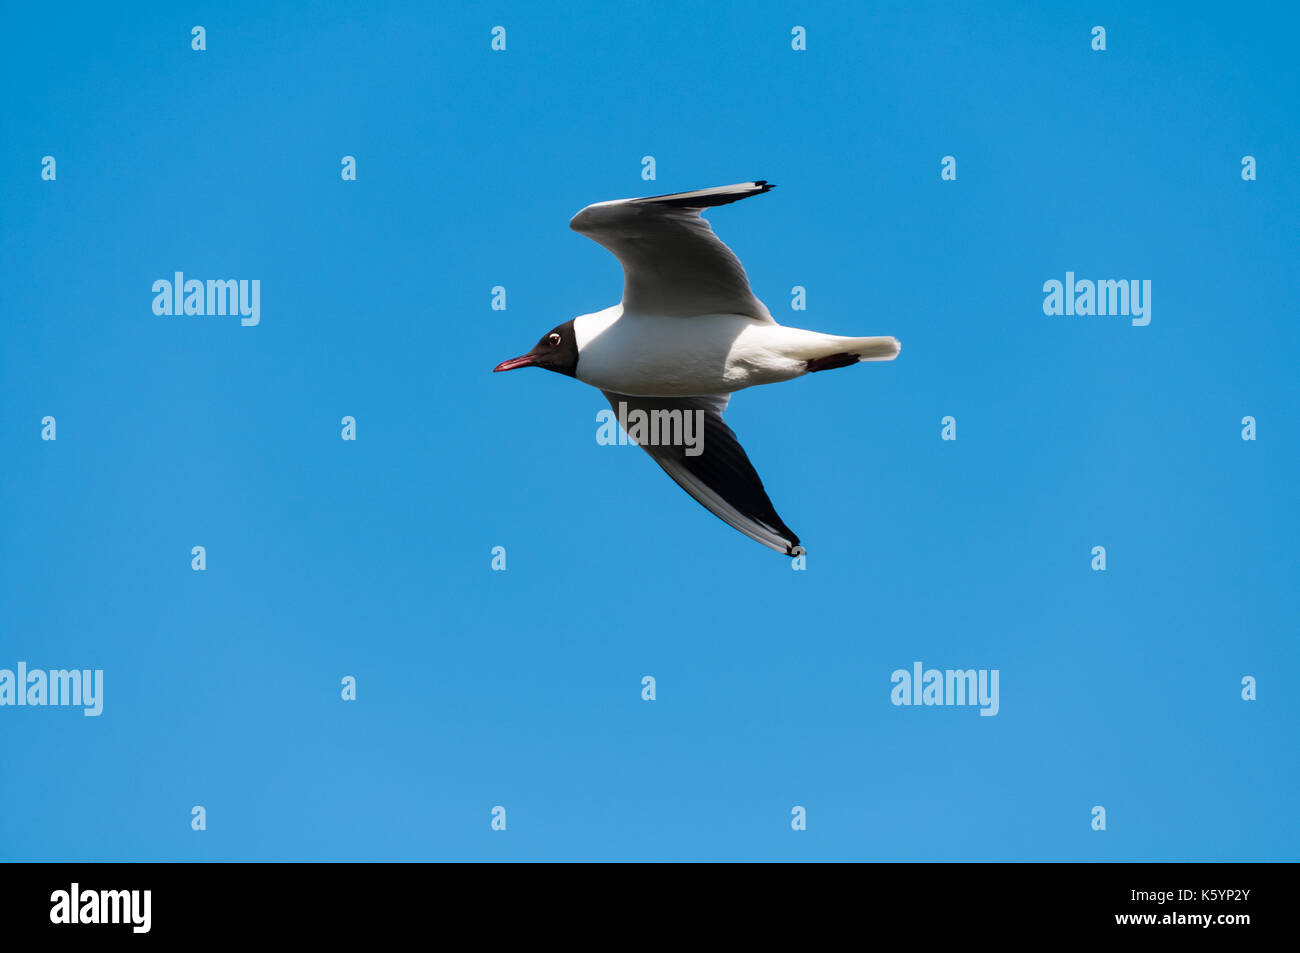 A seagull flying in the beautiful blue sky. Stock Photo